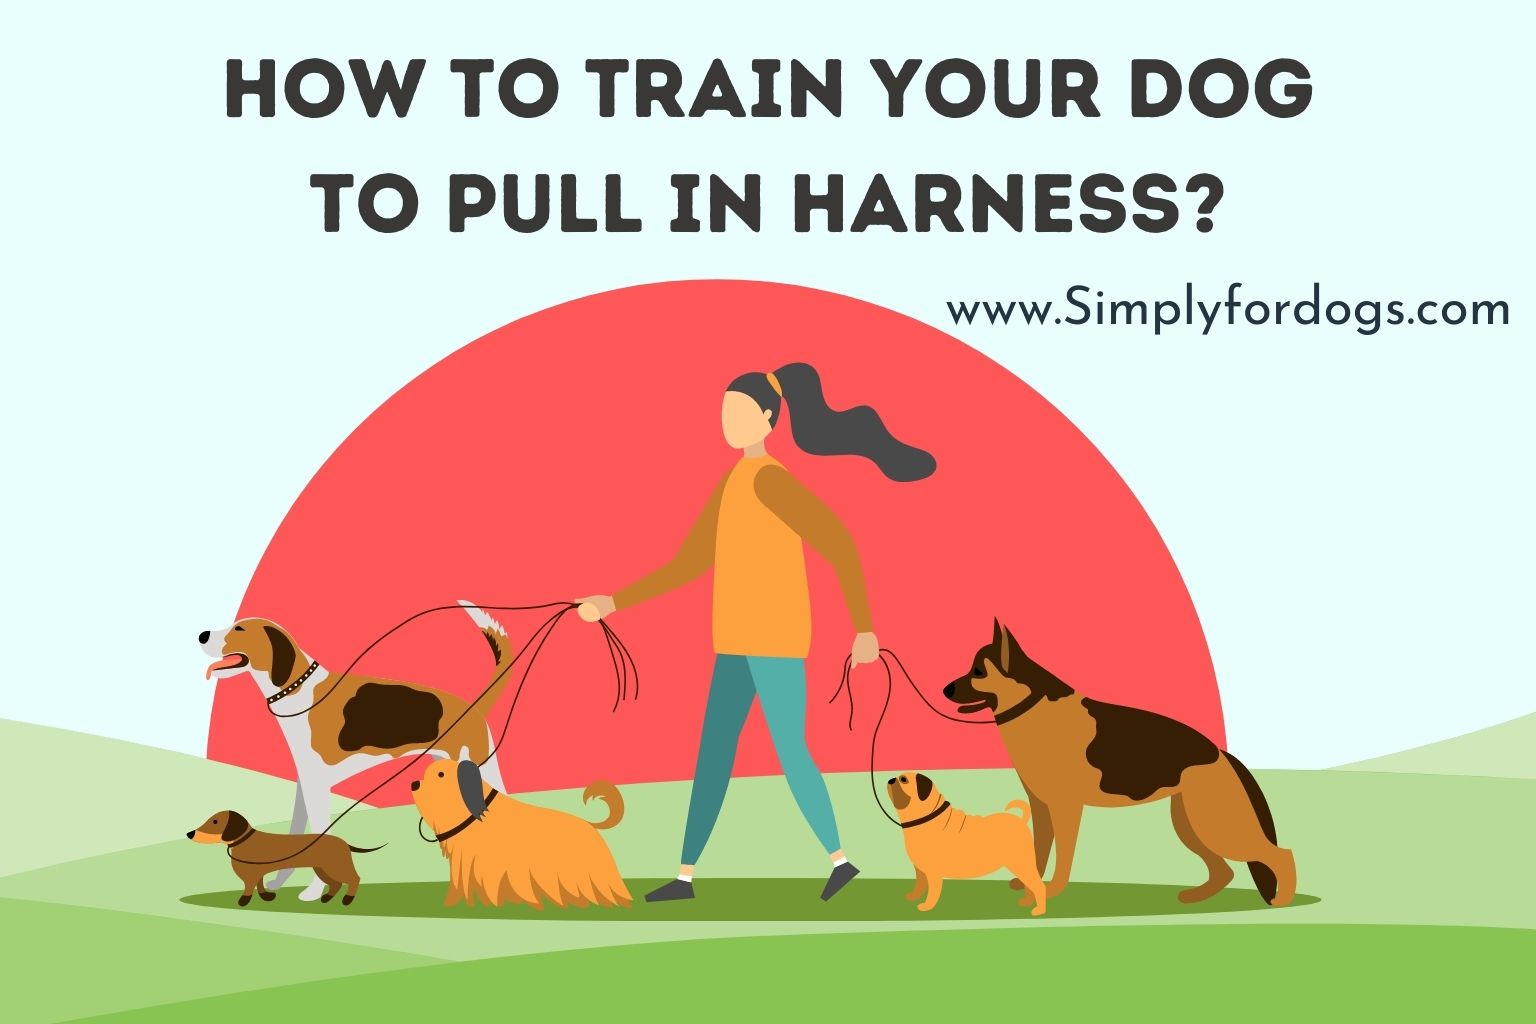 How to Train Your Dog to Pull in Harness